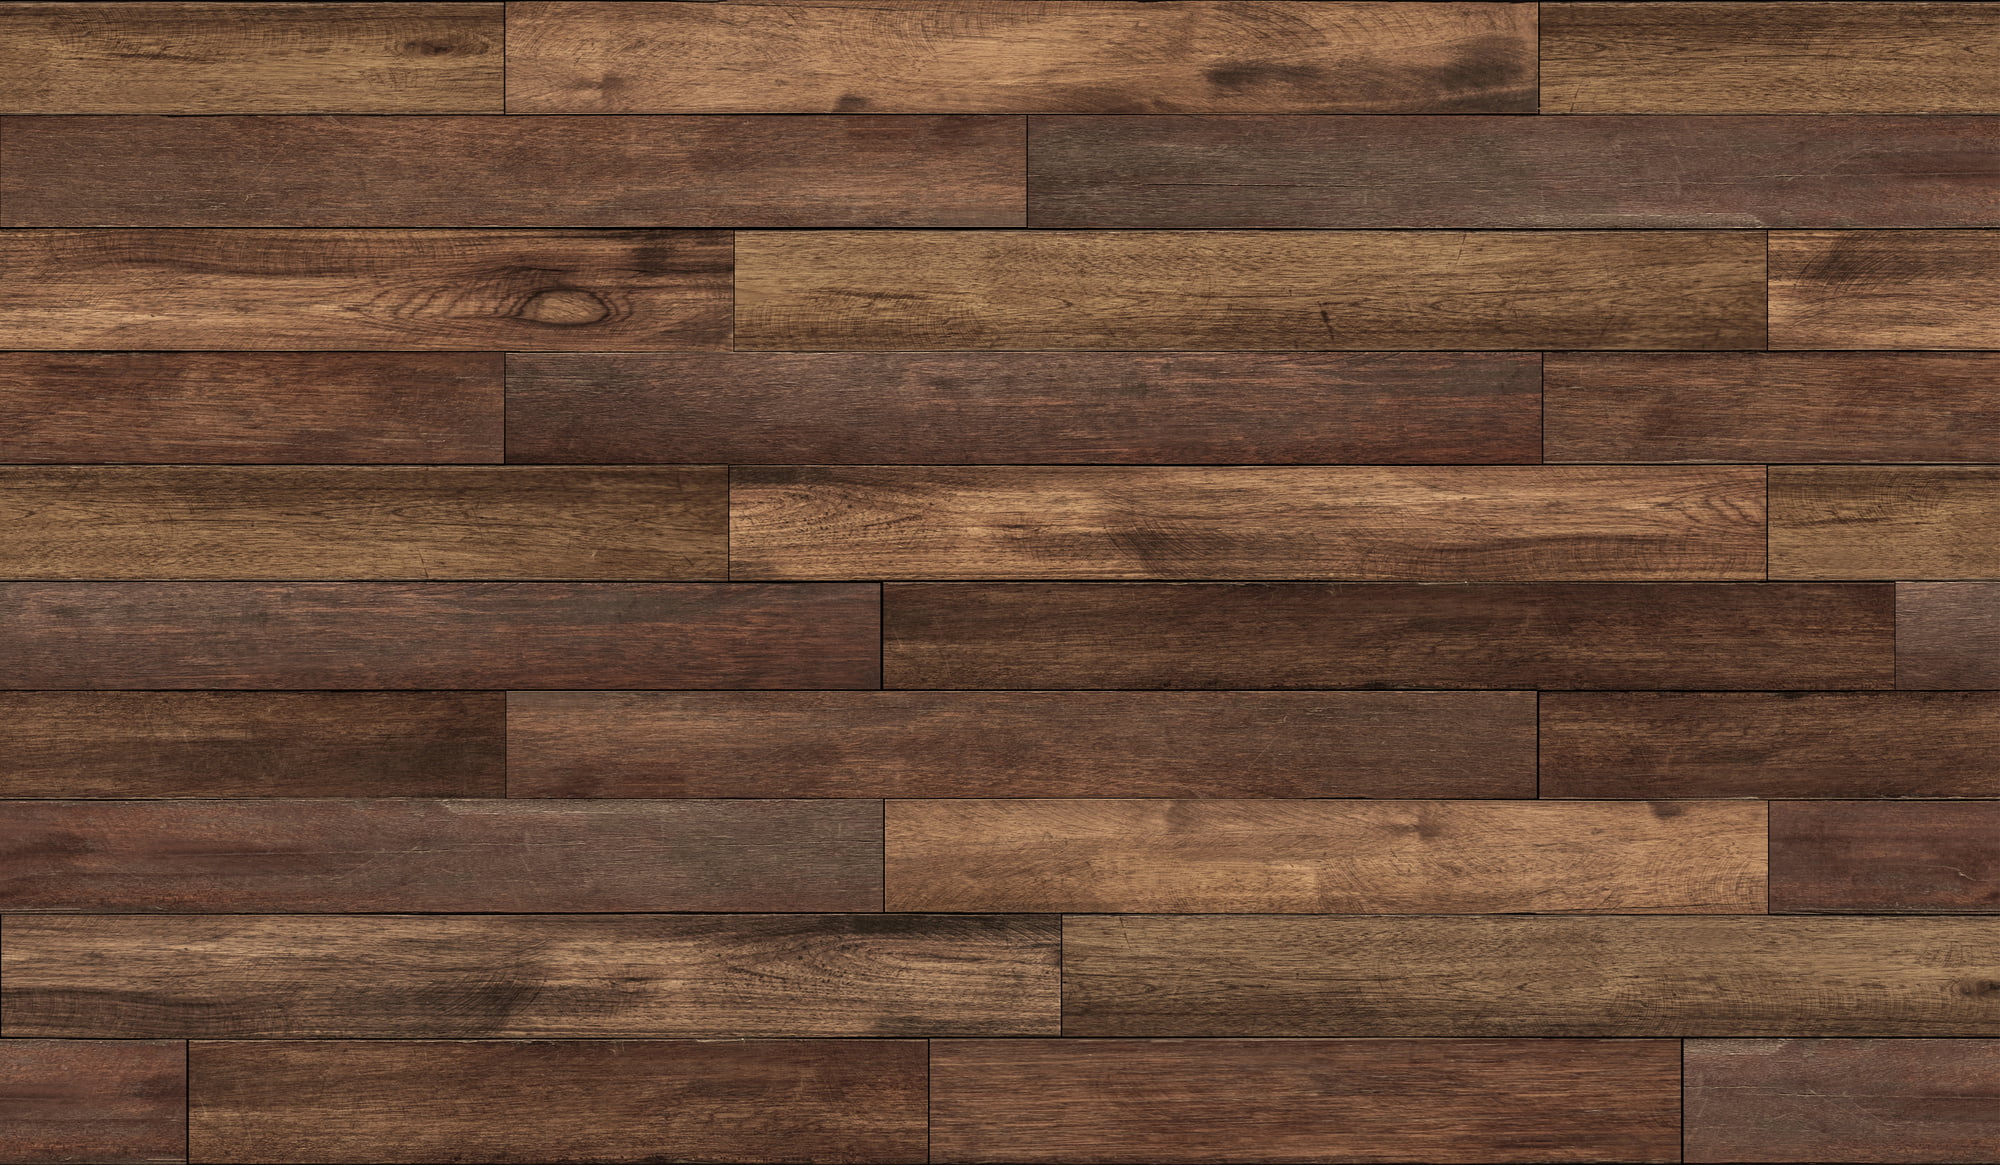 Hardwood flooring is luxurious, hardy, and beautiful, but which hardwood colors highlight your home the best? Learn here.